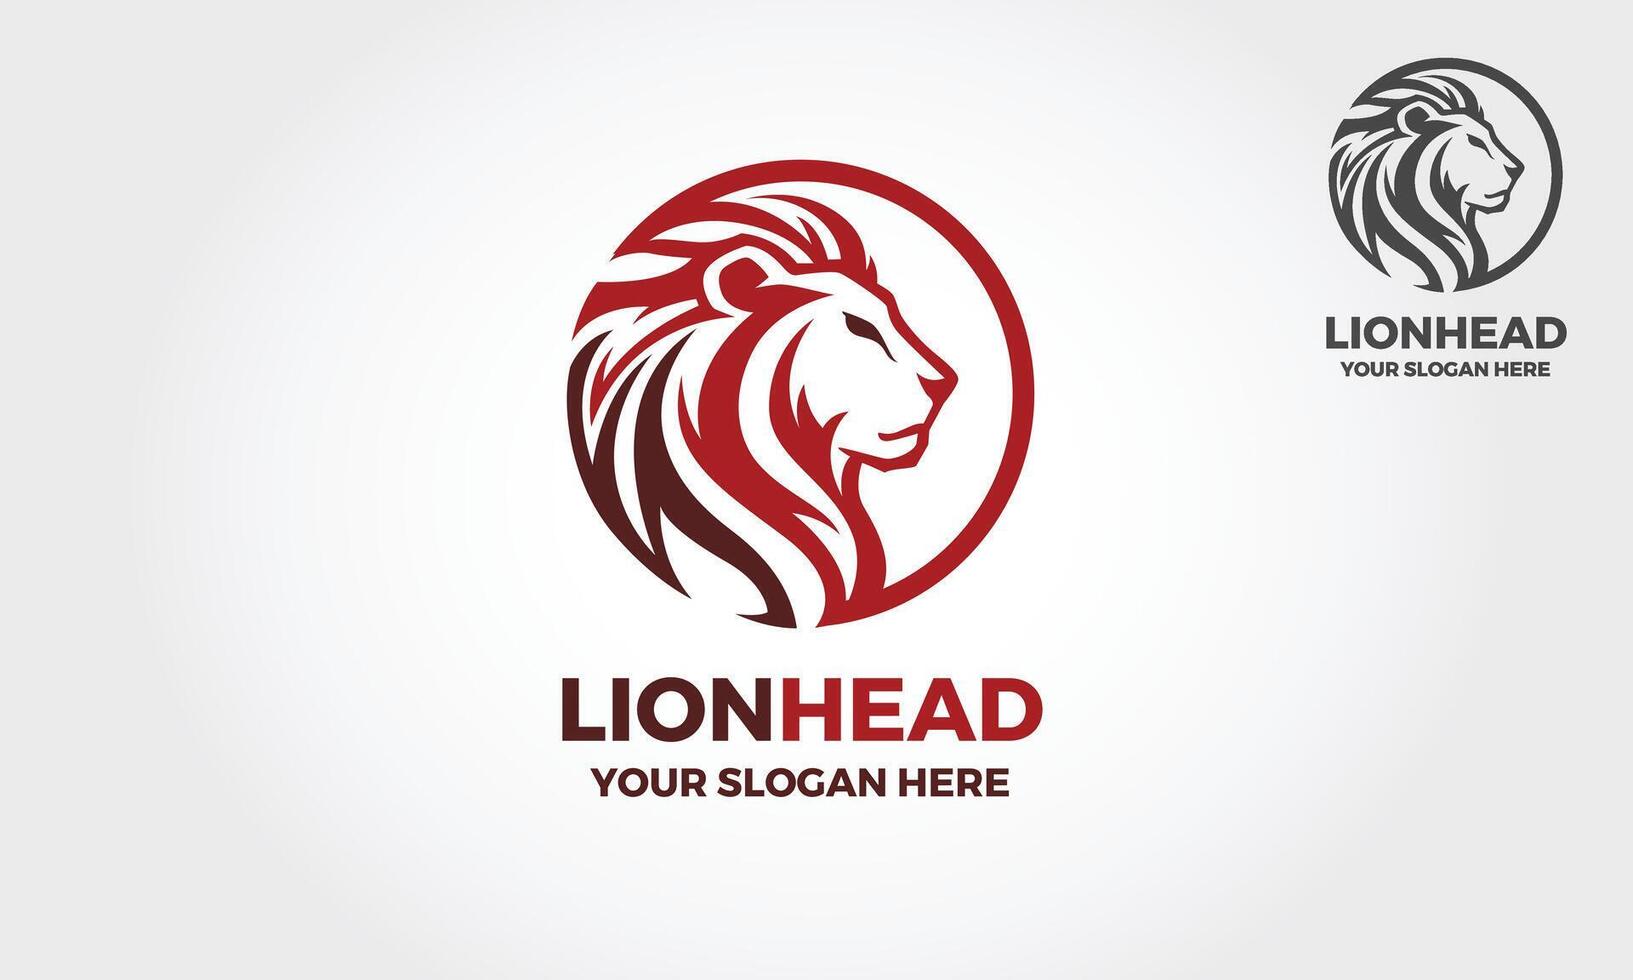 Lion head logo template suitable for businesses and product names. Element for the brand identity, vector illustration.